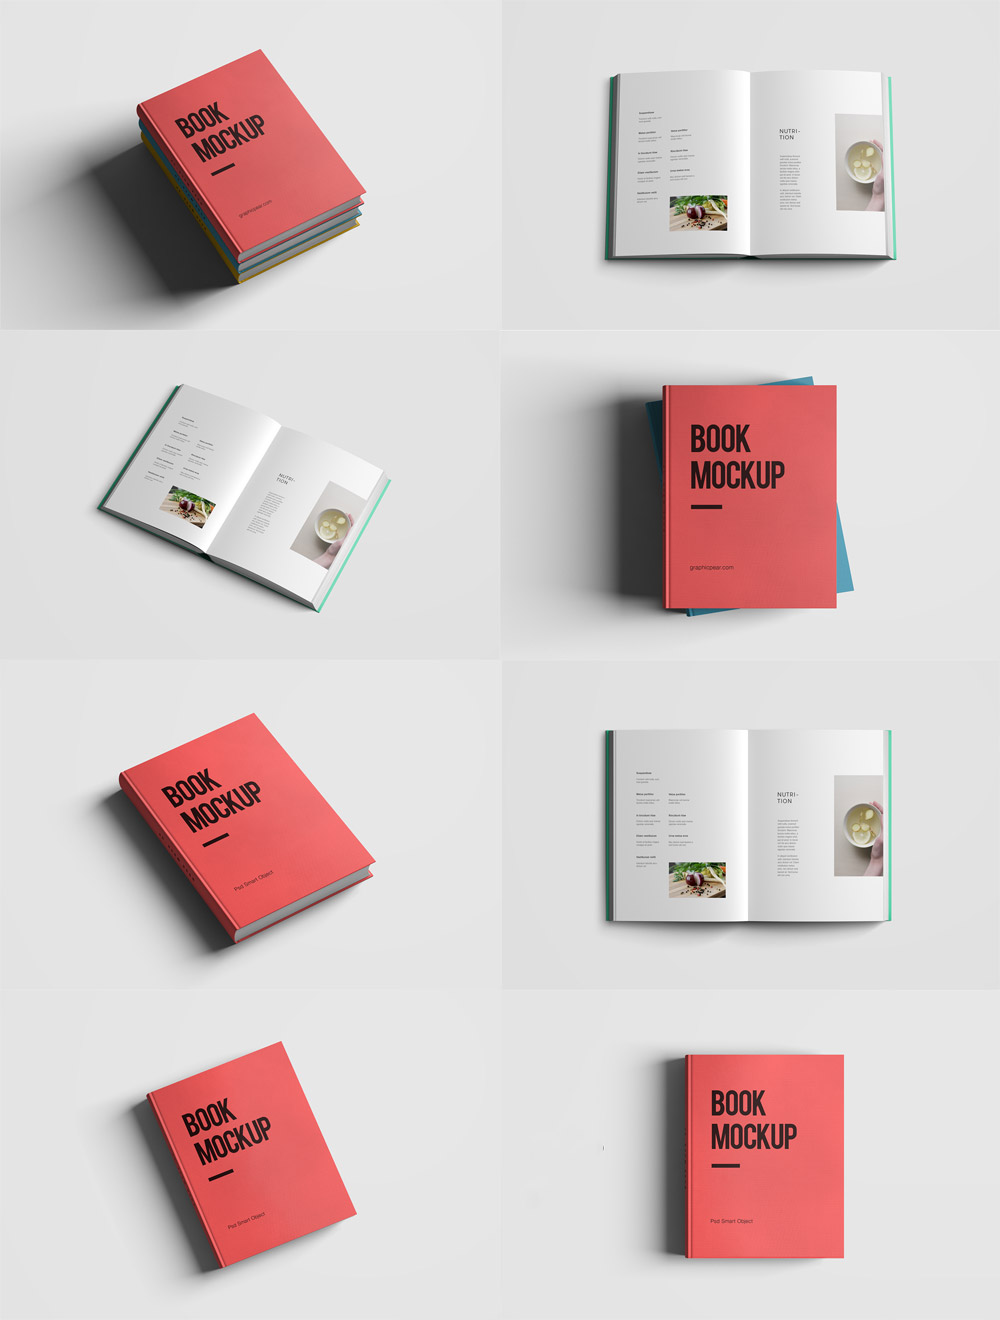 Download Realistic Book Mockup Template Pack Free PSD - Download PSD